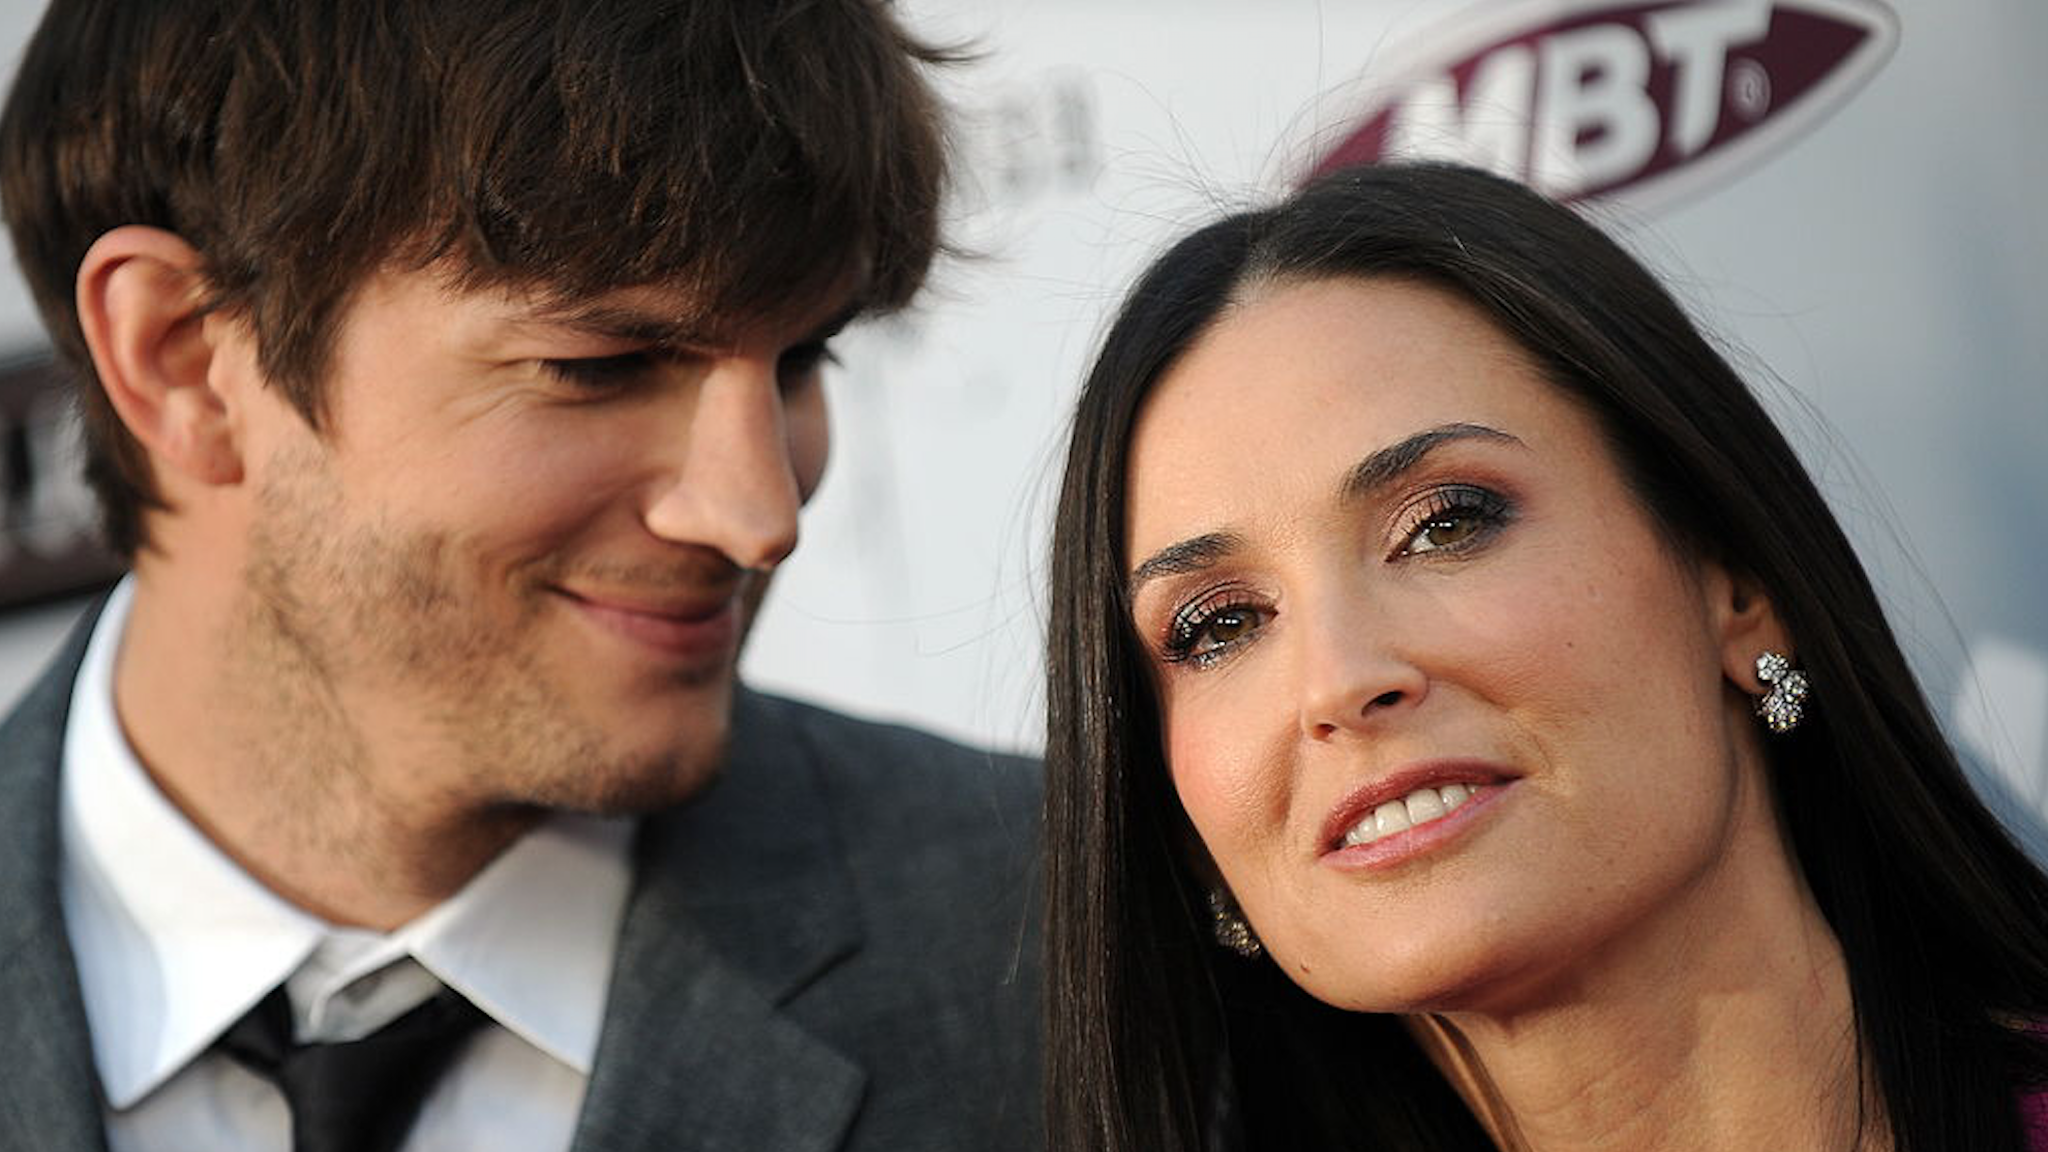 Actors Demi Moore and Ashton Kutcher arrive at the premiere of "The Joneses" in Hollywood, California, on April 8, 2010.